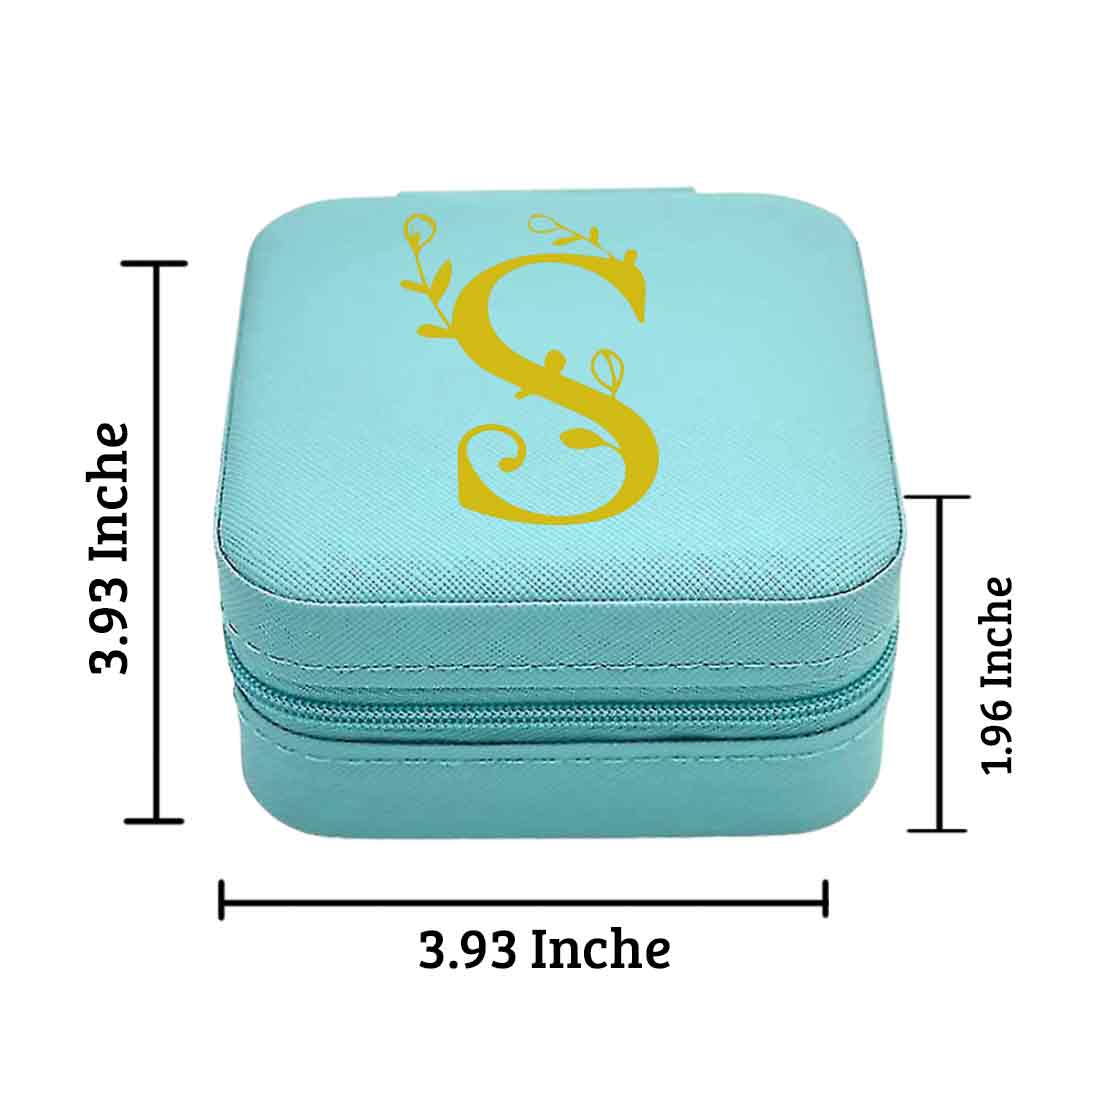 Personalized PU Leather Jewelry Box for Gift Storage Box Organiser Case with Rings Earrings Slots